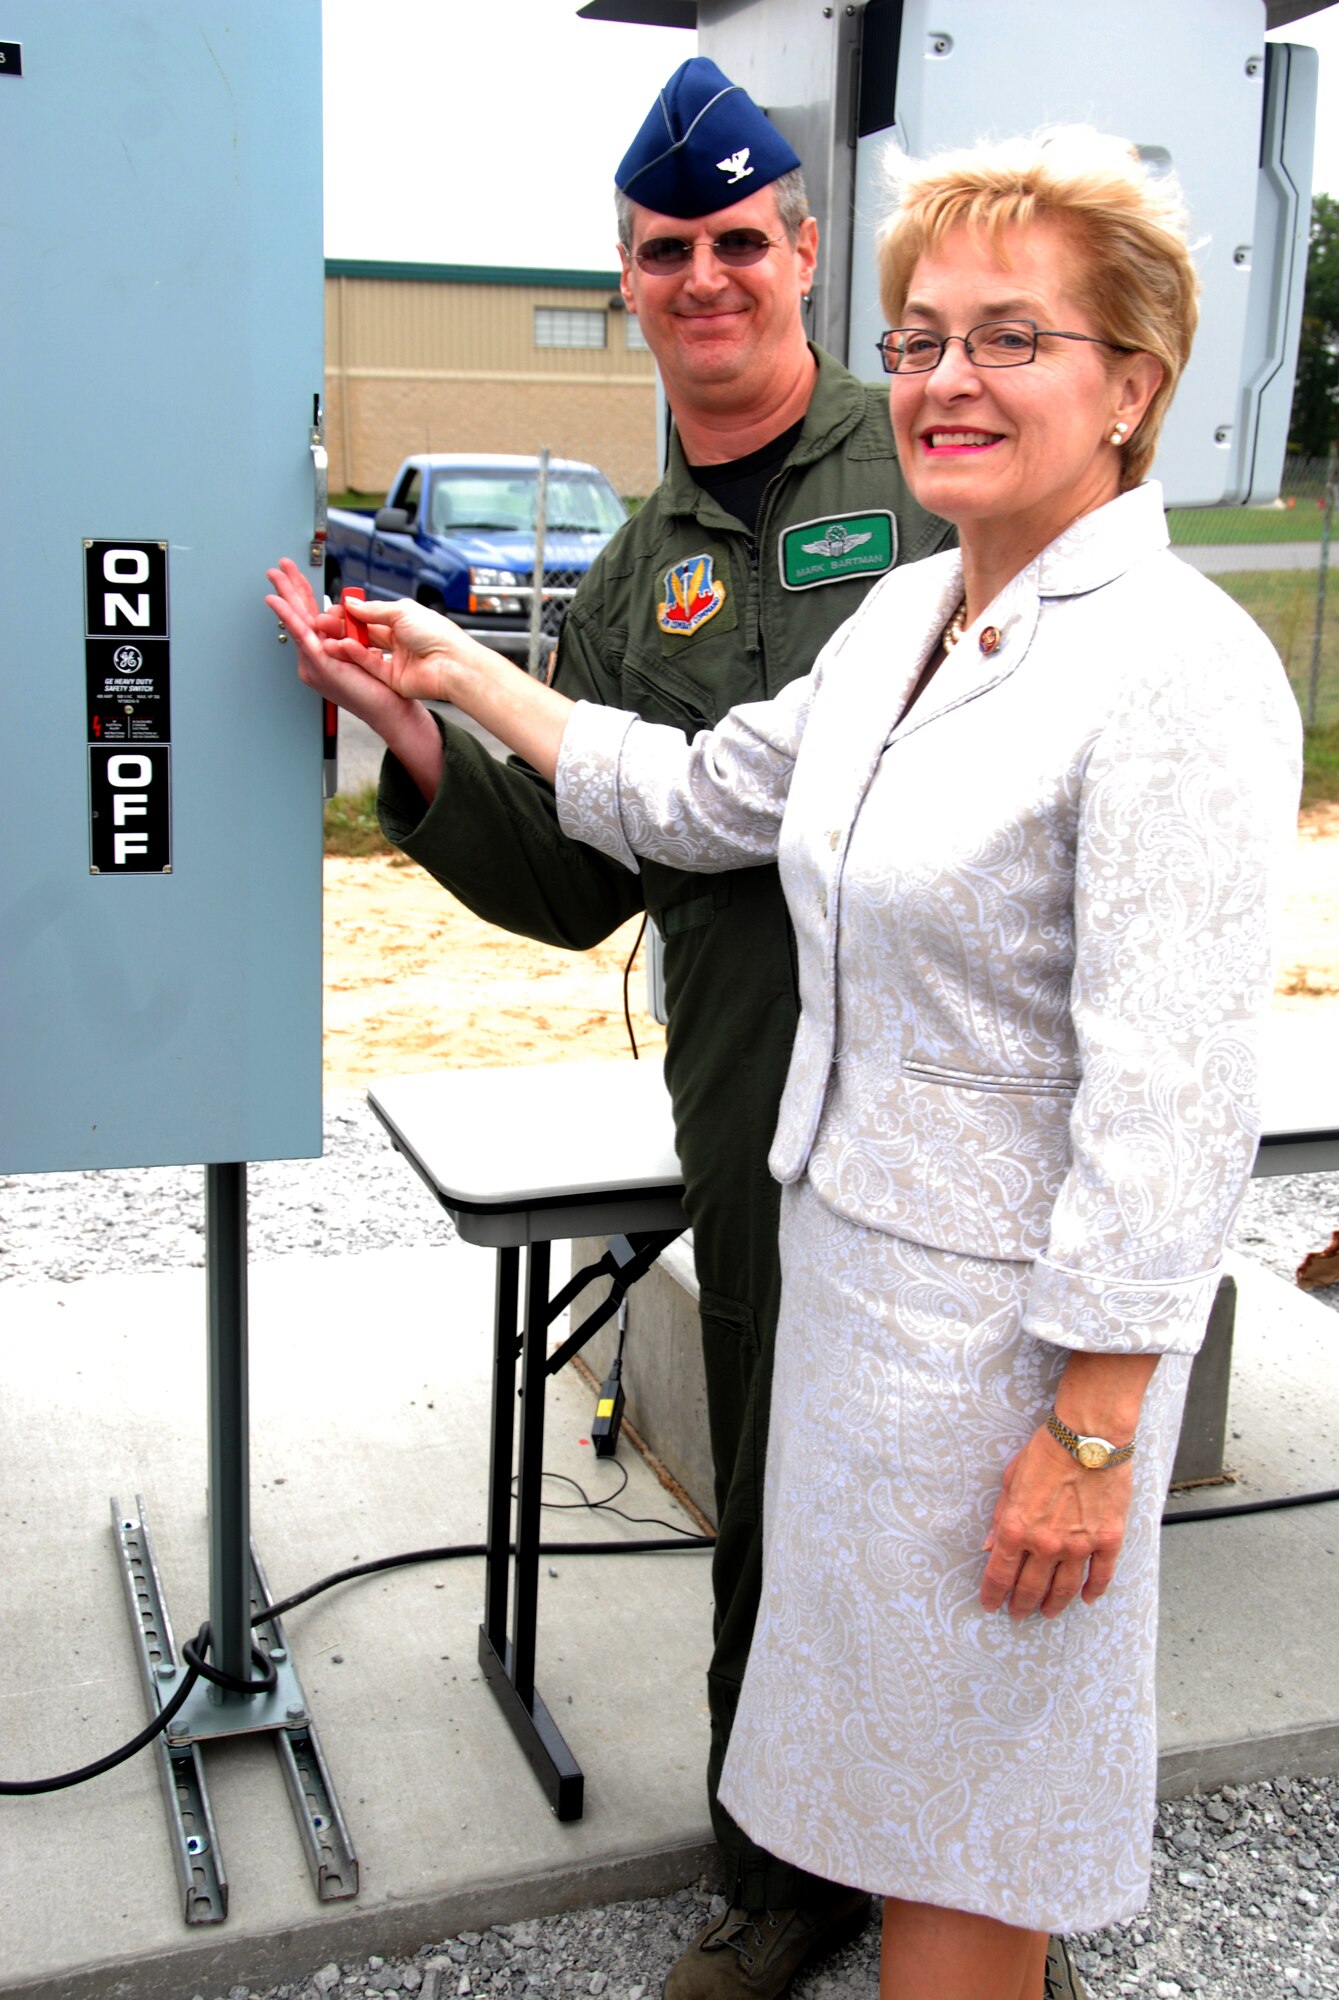 Col. Mark E. Bartman, 180th Fighter Wing Commander, Ohio Air national Guard and Congresswoman Marcy Kaptur turn on the power at the 180th Fighter Wing's Alternative Energy site on September 27, 2008. The solar field is part of the 180th FW's Renewable Energy Project, funded by the Department of Defense Research and Development Program in an effort to reduce the 180th's use of limited fossil fuel and dependence on foreign energy sources. Once completed, the solar field is expected to produce 800-900 Kilowatts of electricity, which will allow the 180th to save approximately 37.5% on the annual electricity budget. The solar field will also reduce the amount of coal burned to produce energy by almost 250 tons annually, while at the same time reducing harmful emissions and greenhouse gasses. USAF Photo by Senior Airman Jodi Joice (Released).